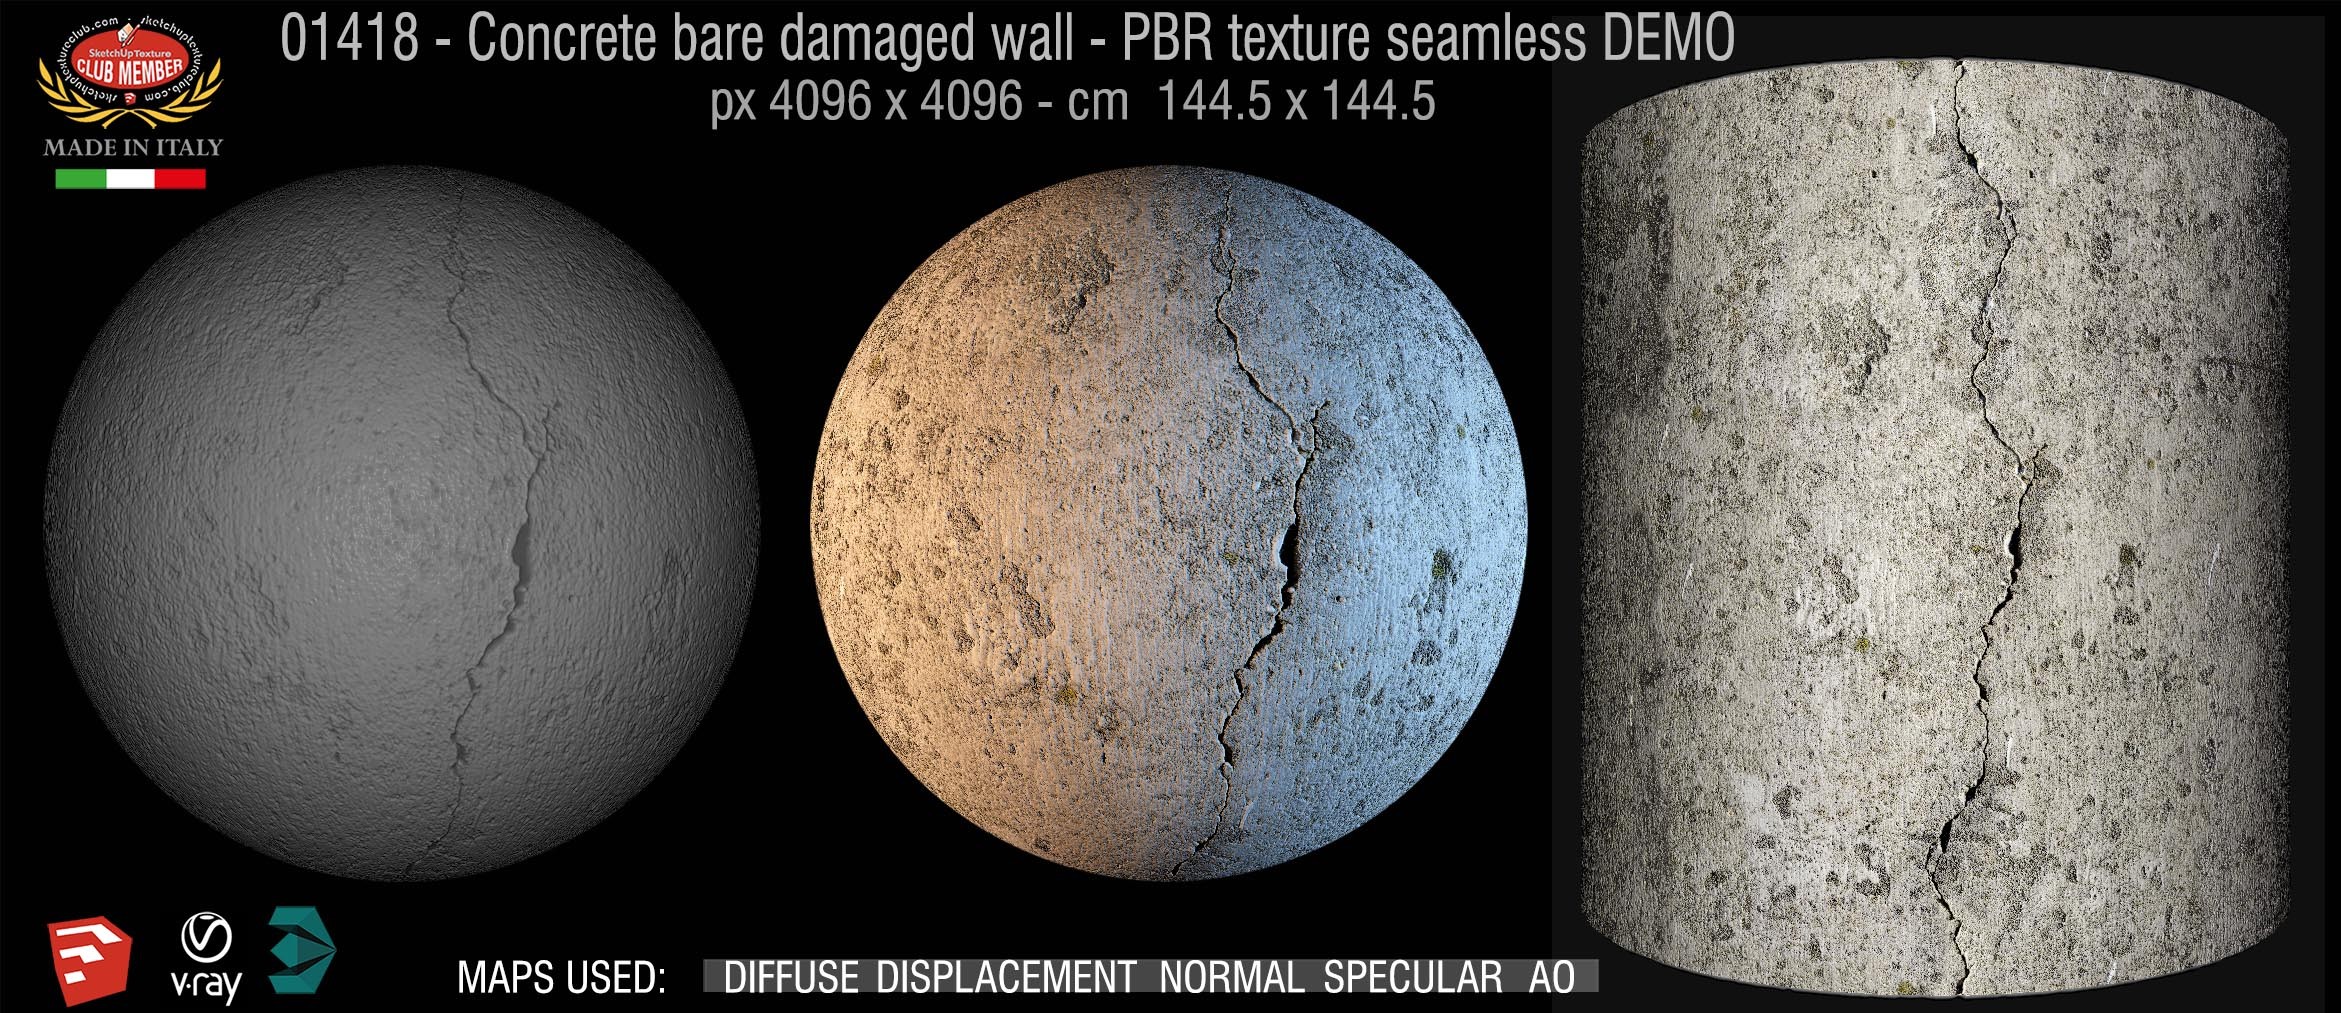 01418 Concrete bare damaged wall texture seamless DEMO